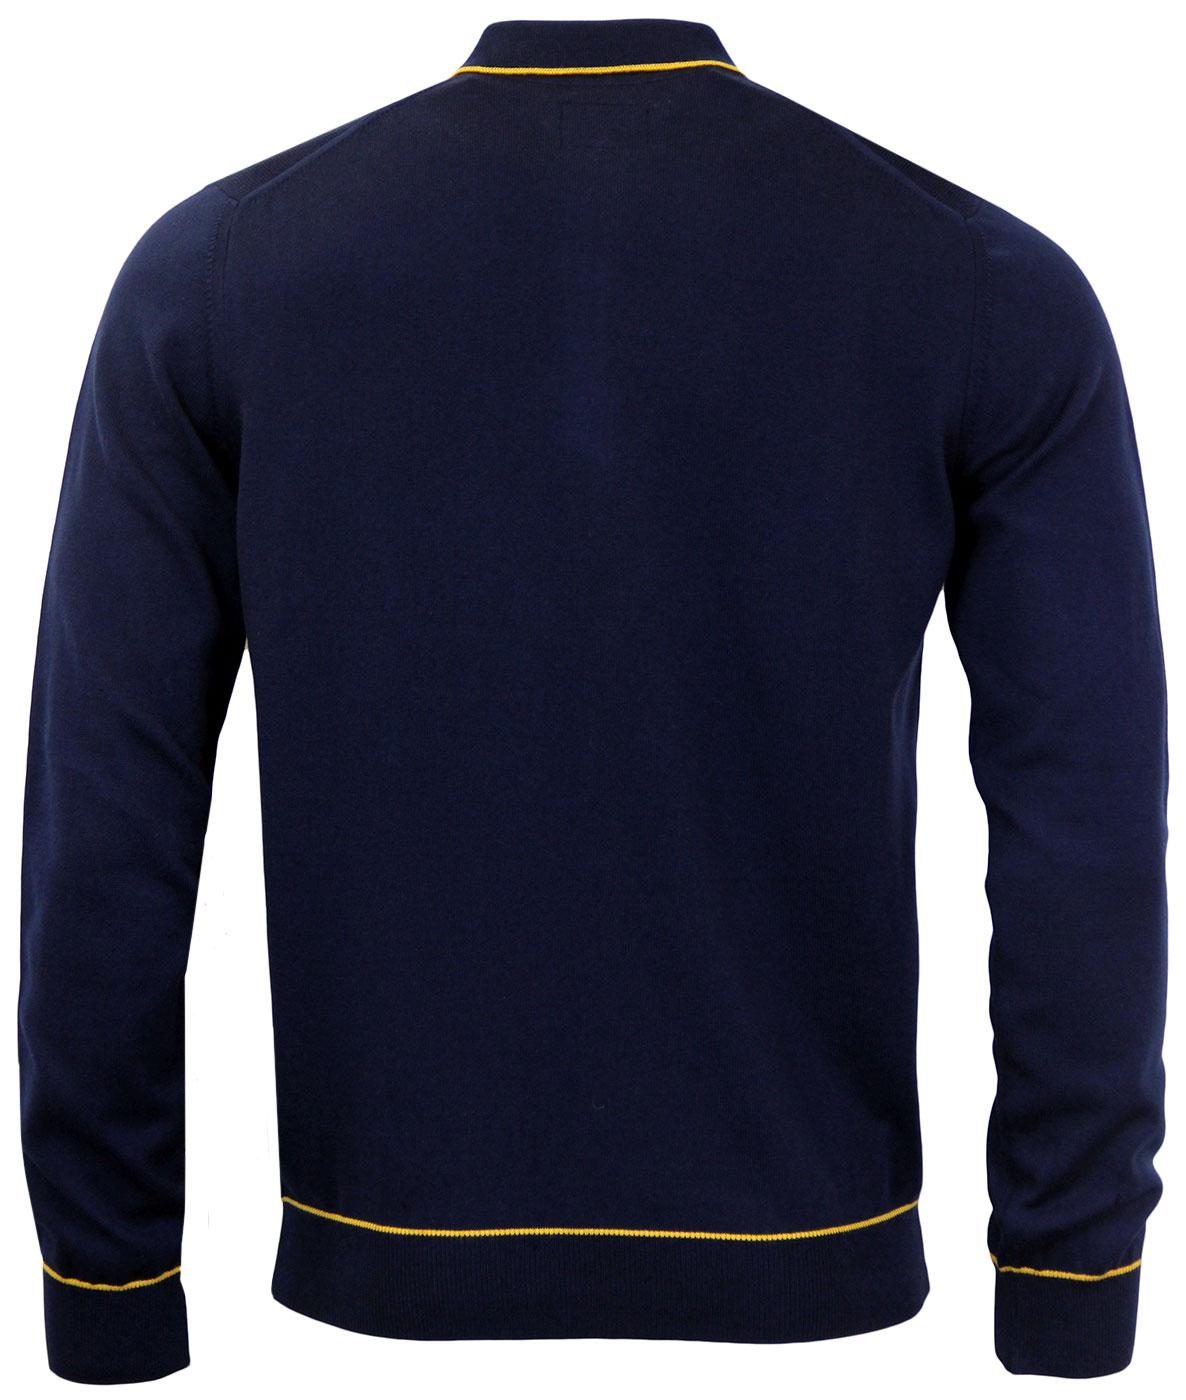 LOIS x PETER WERTH Retro Contrast Tipped Knit Polo in Navy